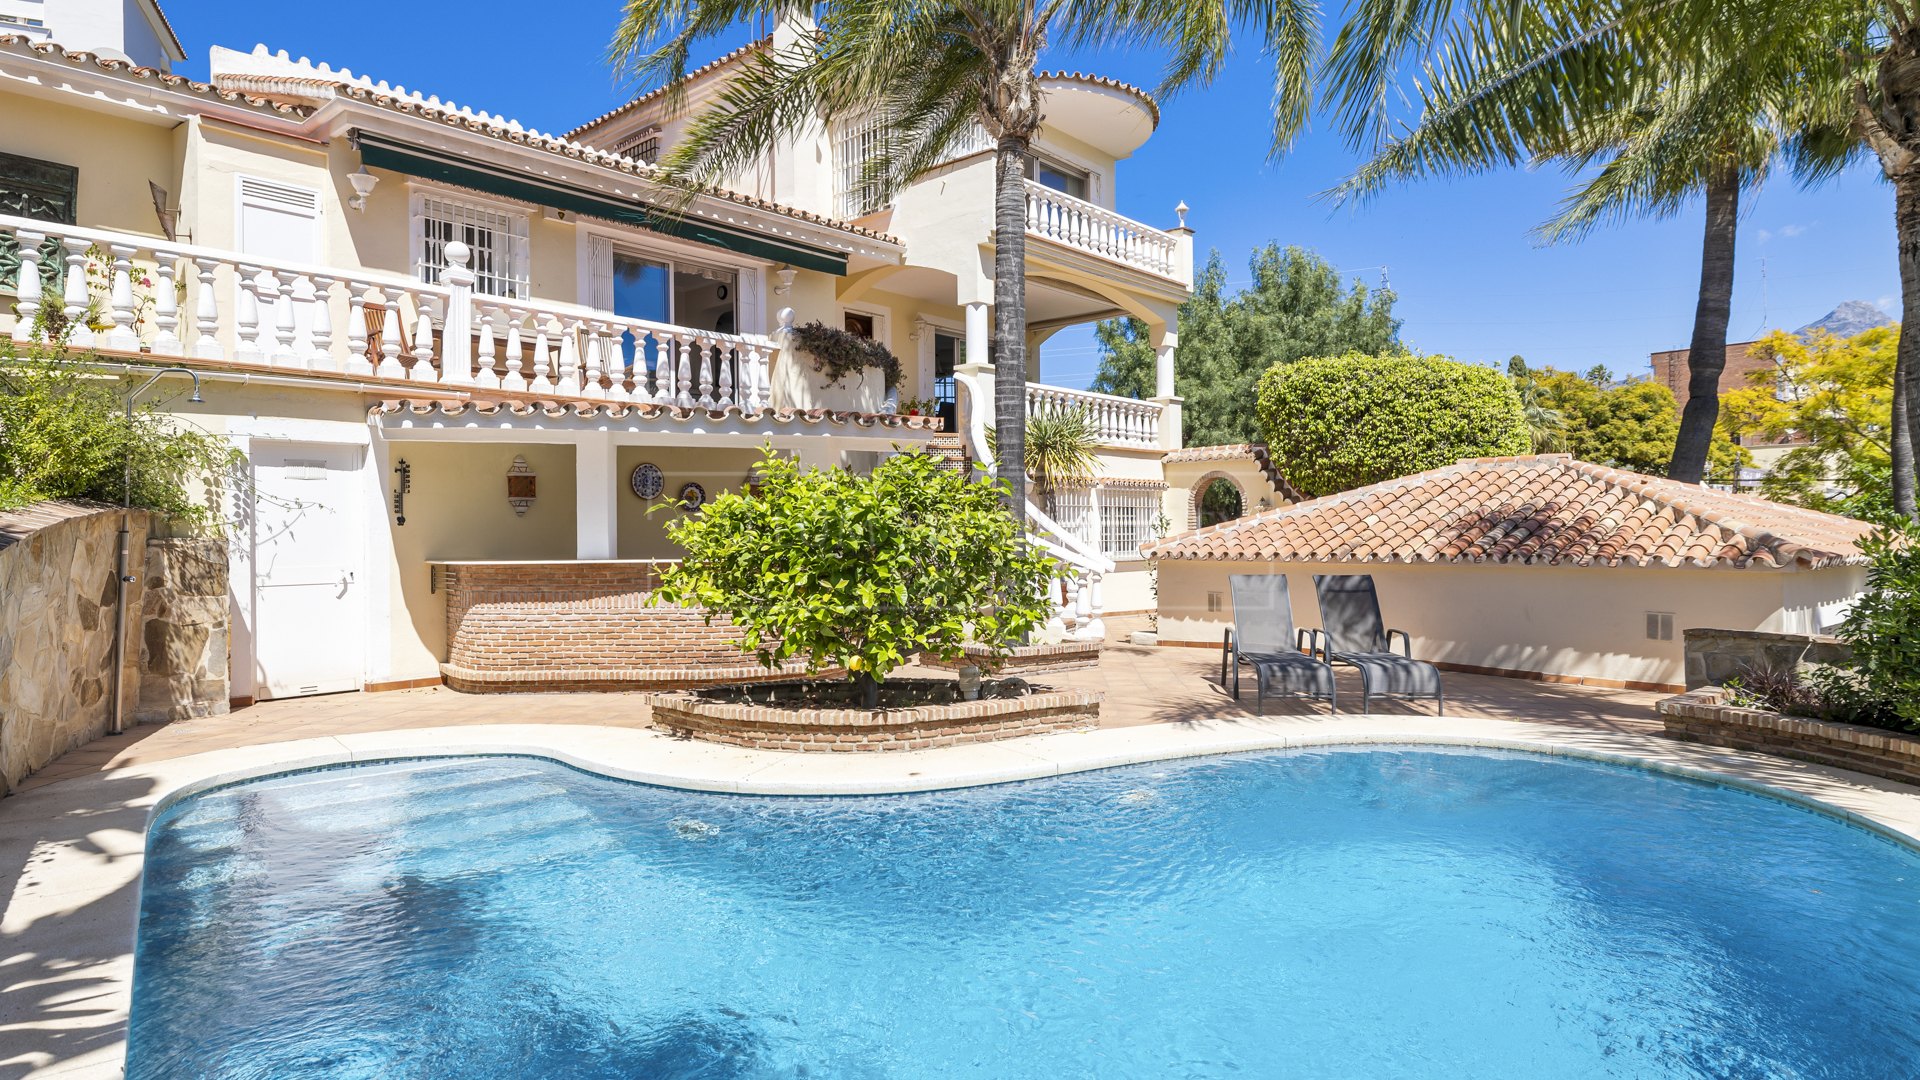 Villa for sale in Nueva Andalucia, walking distance to amenities